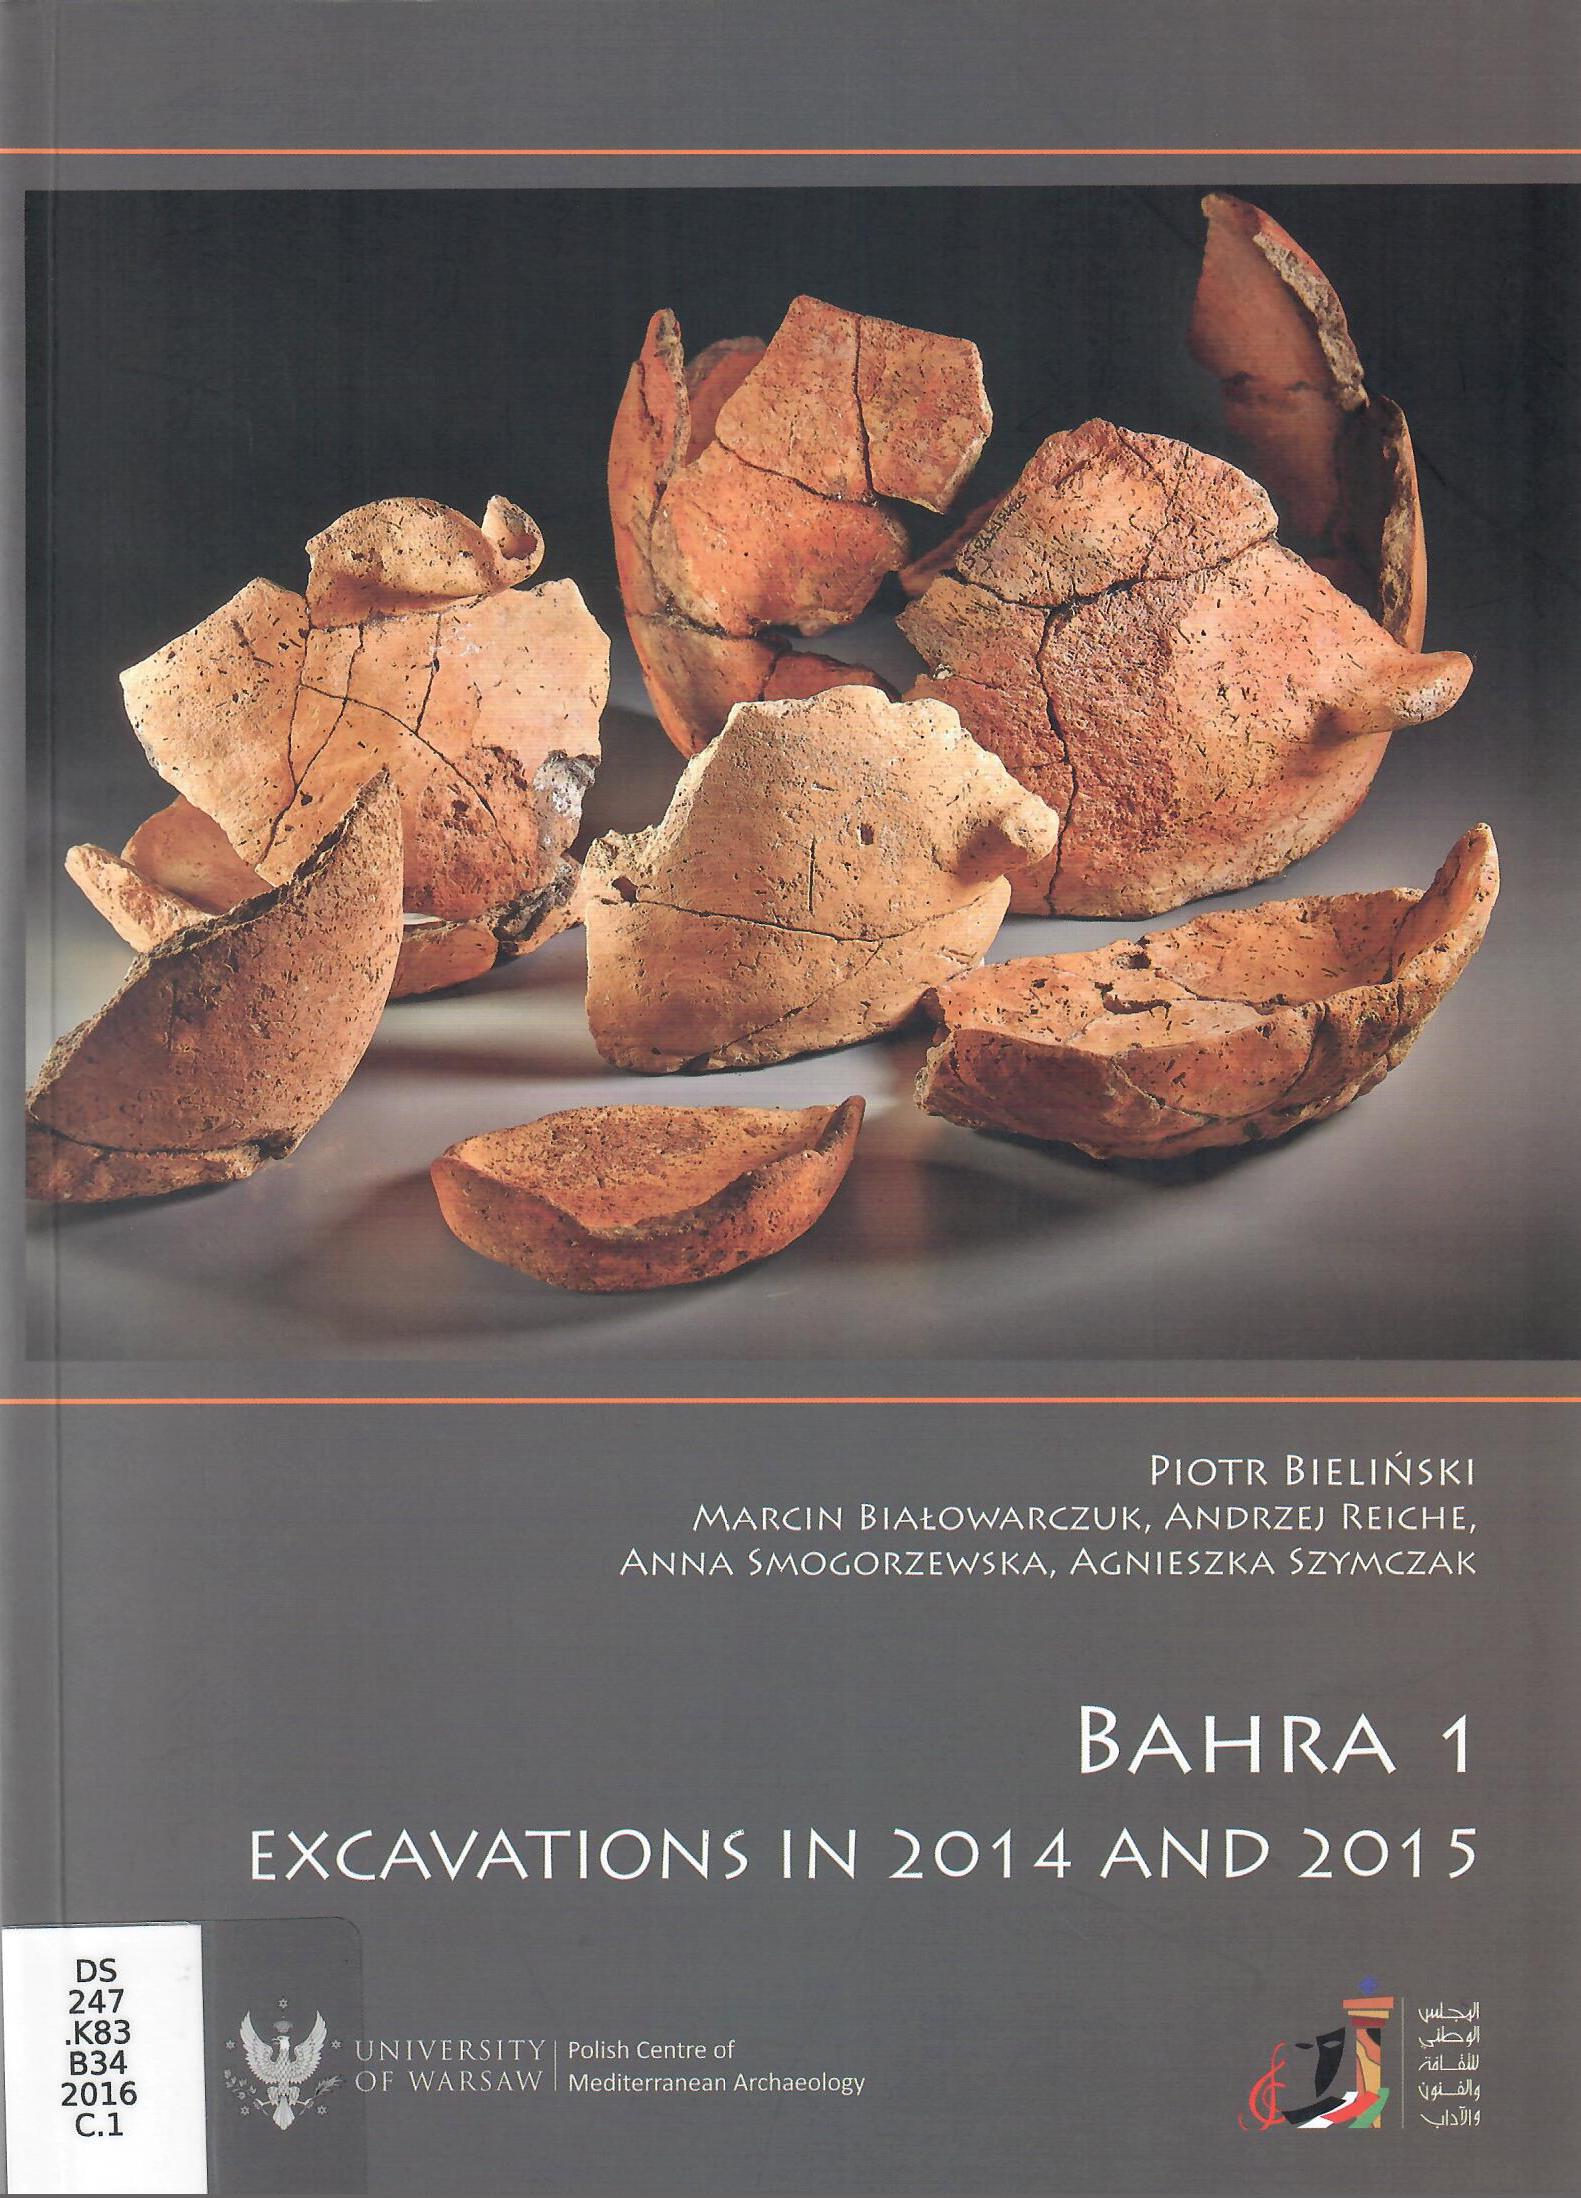 BAHRA 1 EXCAVATIONS IN 2014 AND 2015